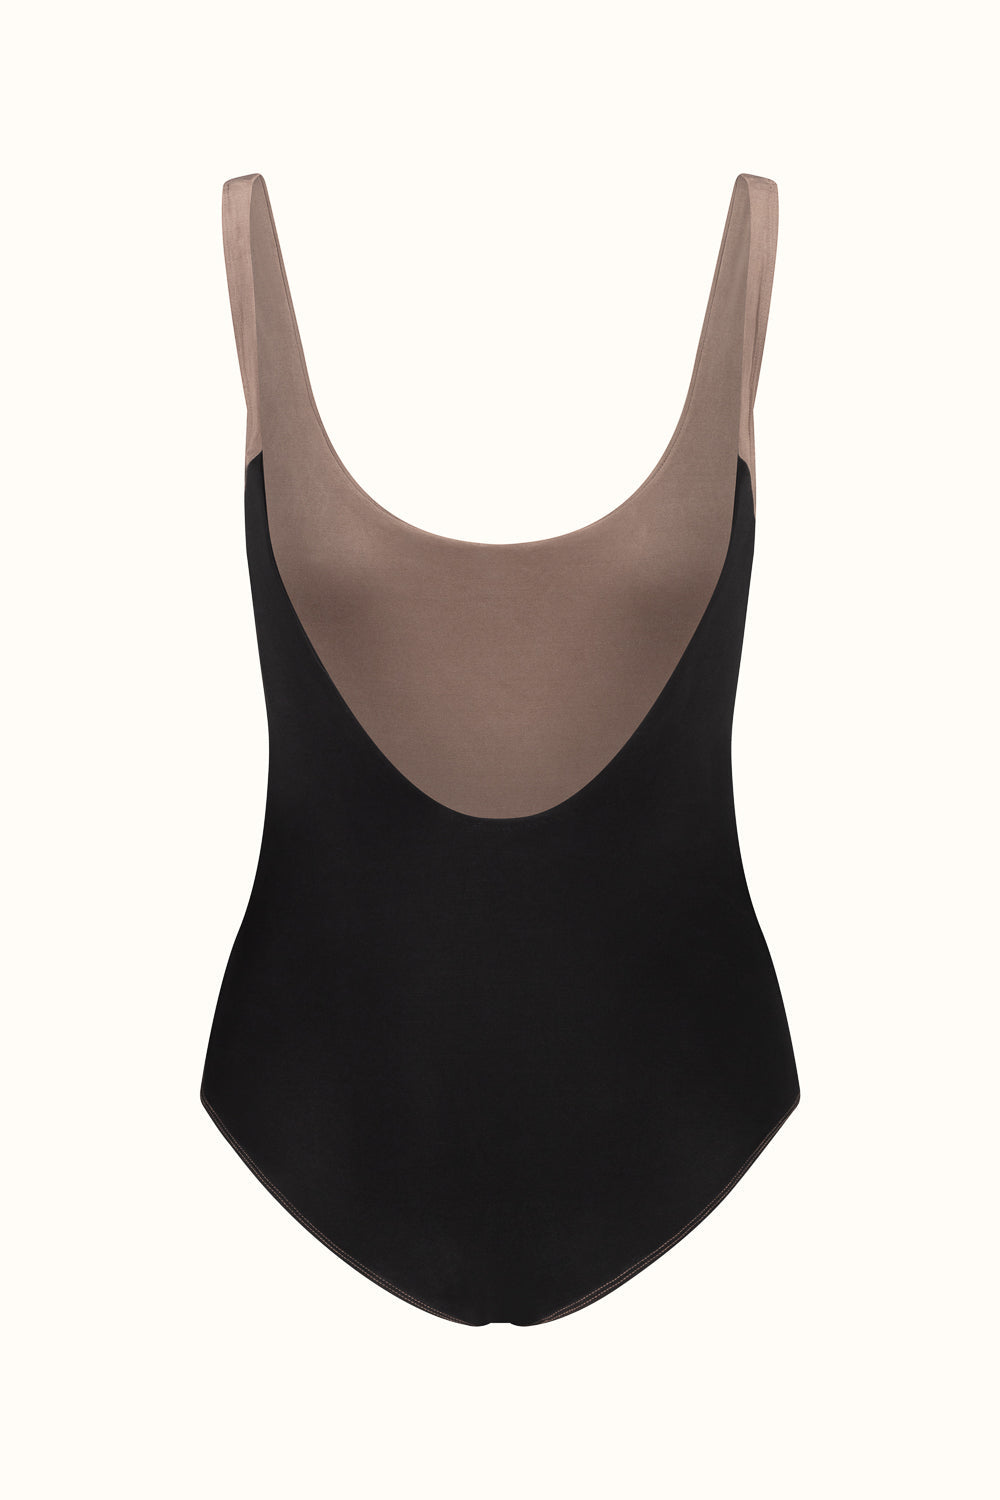 The Two-Tone Classic Swimsuit